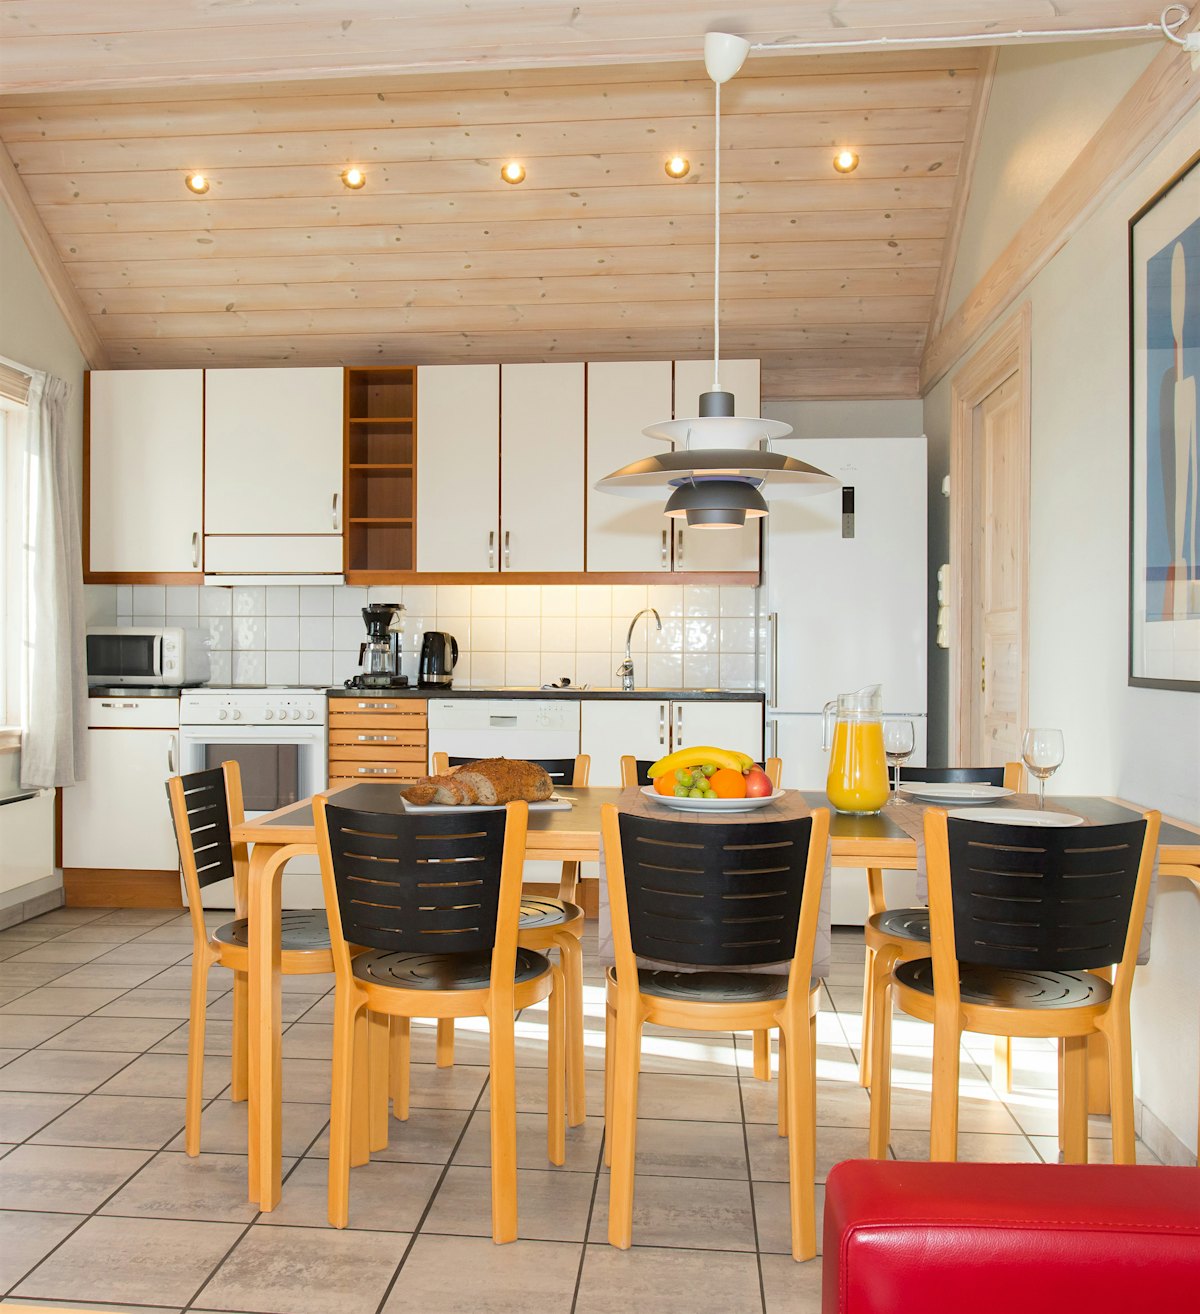 Large open room with kitchen and dining table. The table is covered with fruit platters, bread and drinks. Photo